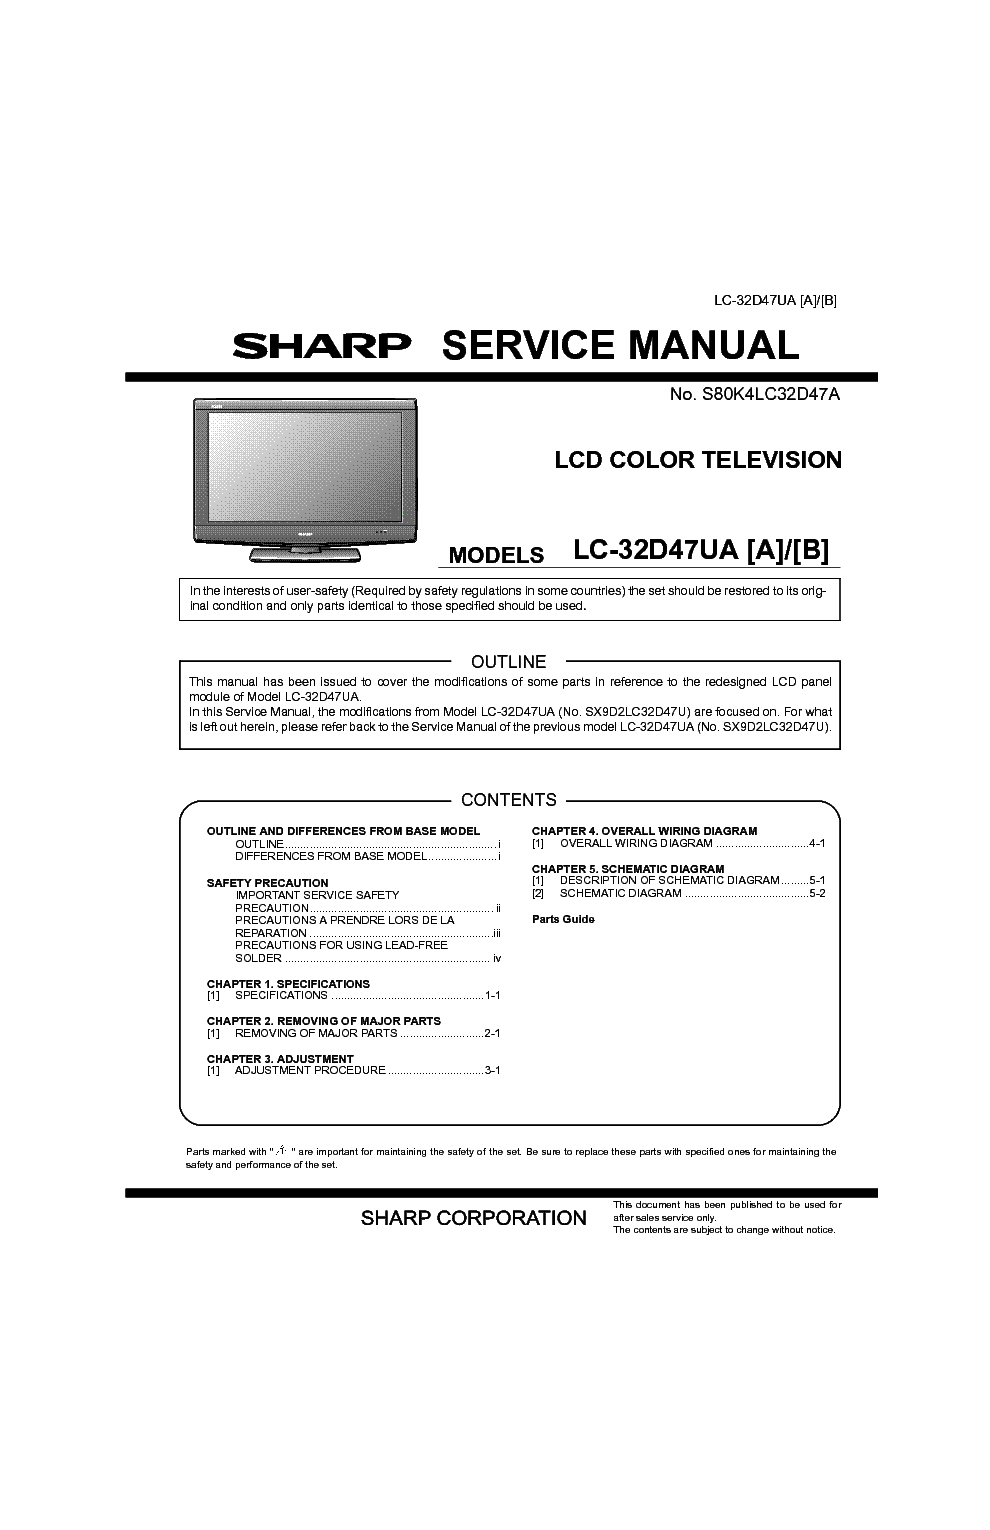 SHARP LC-32D47UA SUPP service manual (1st page)